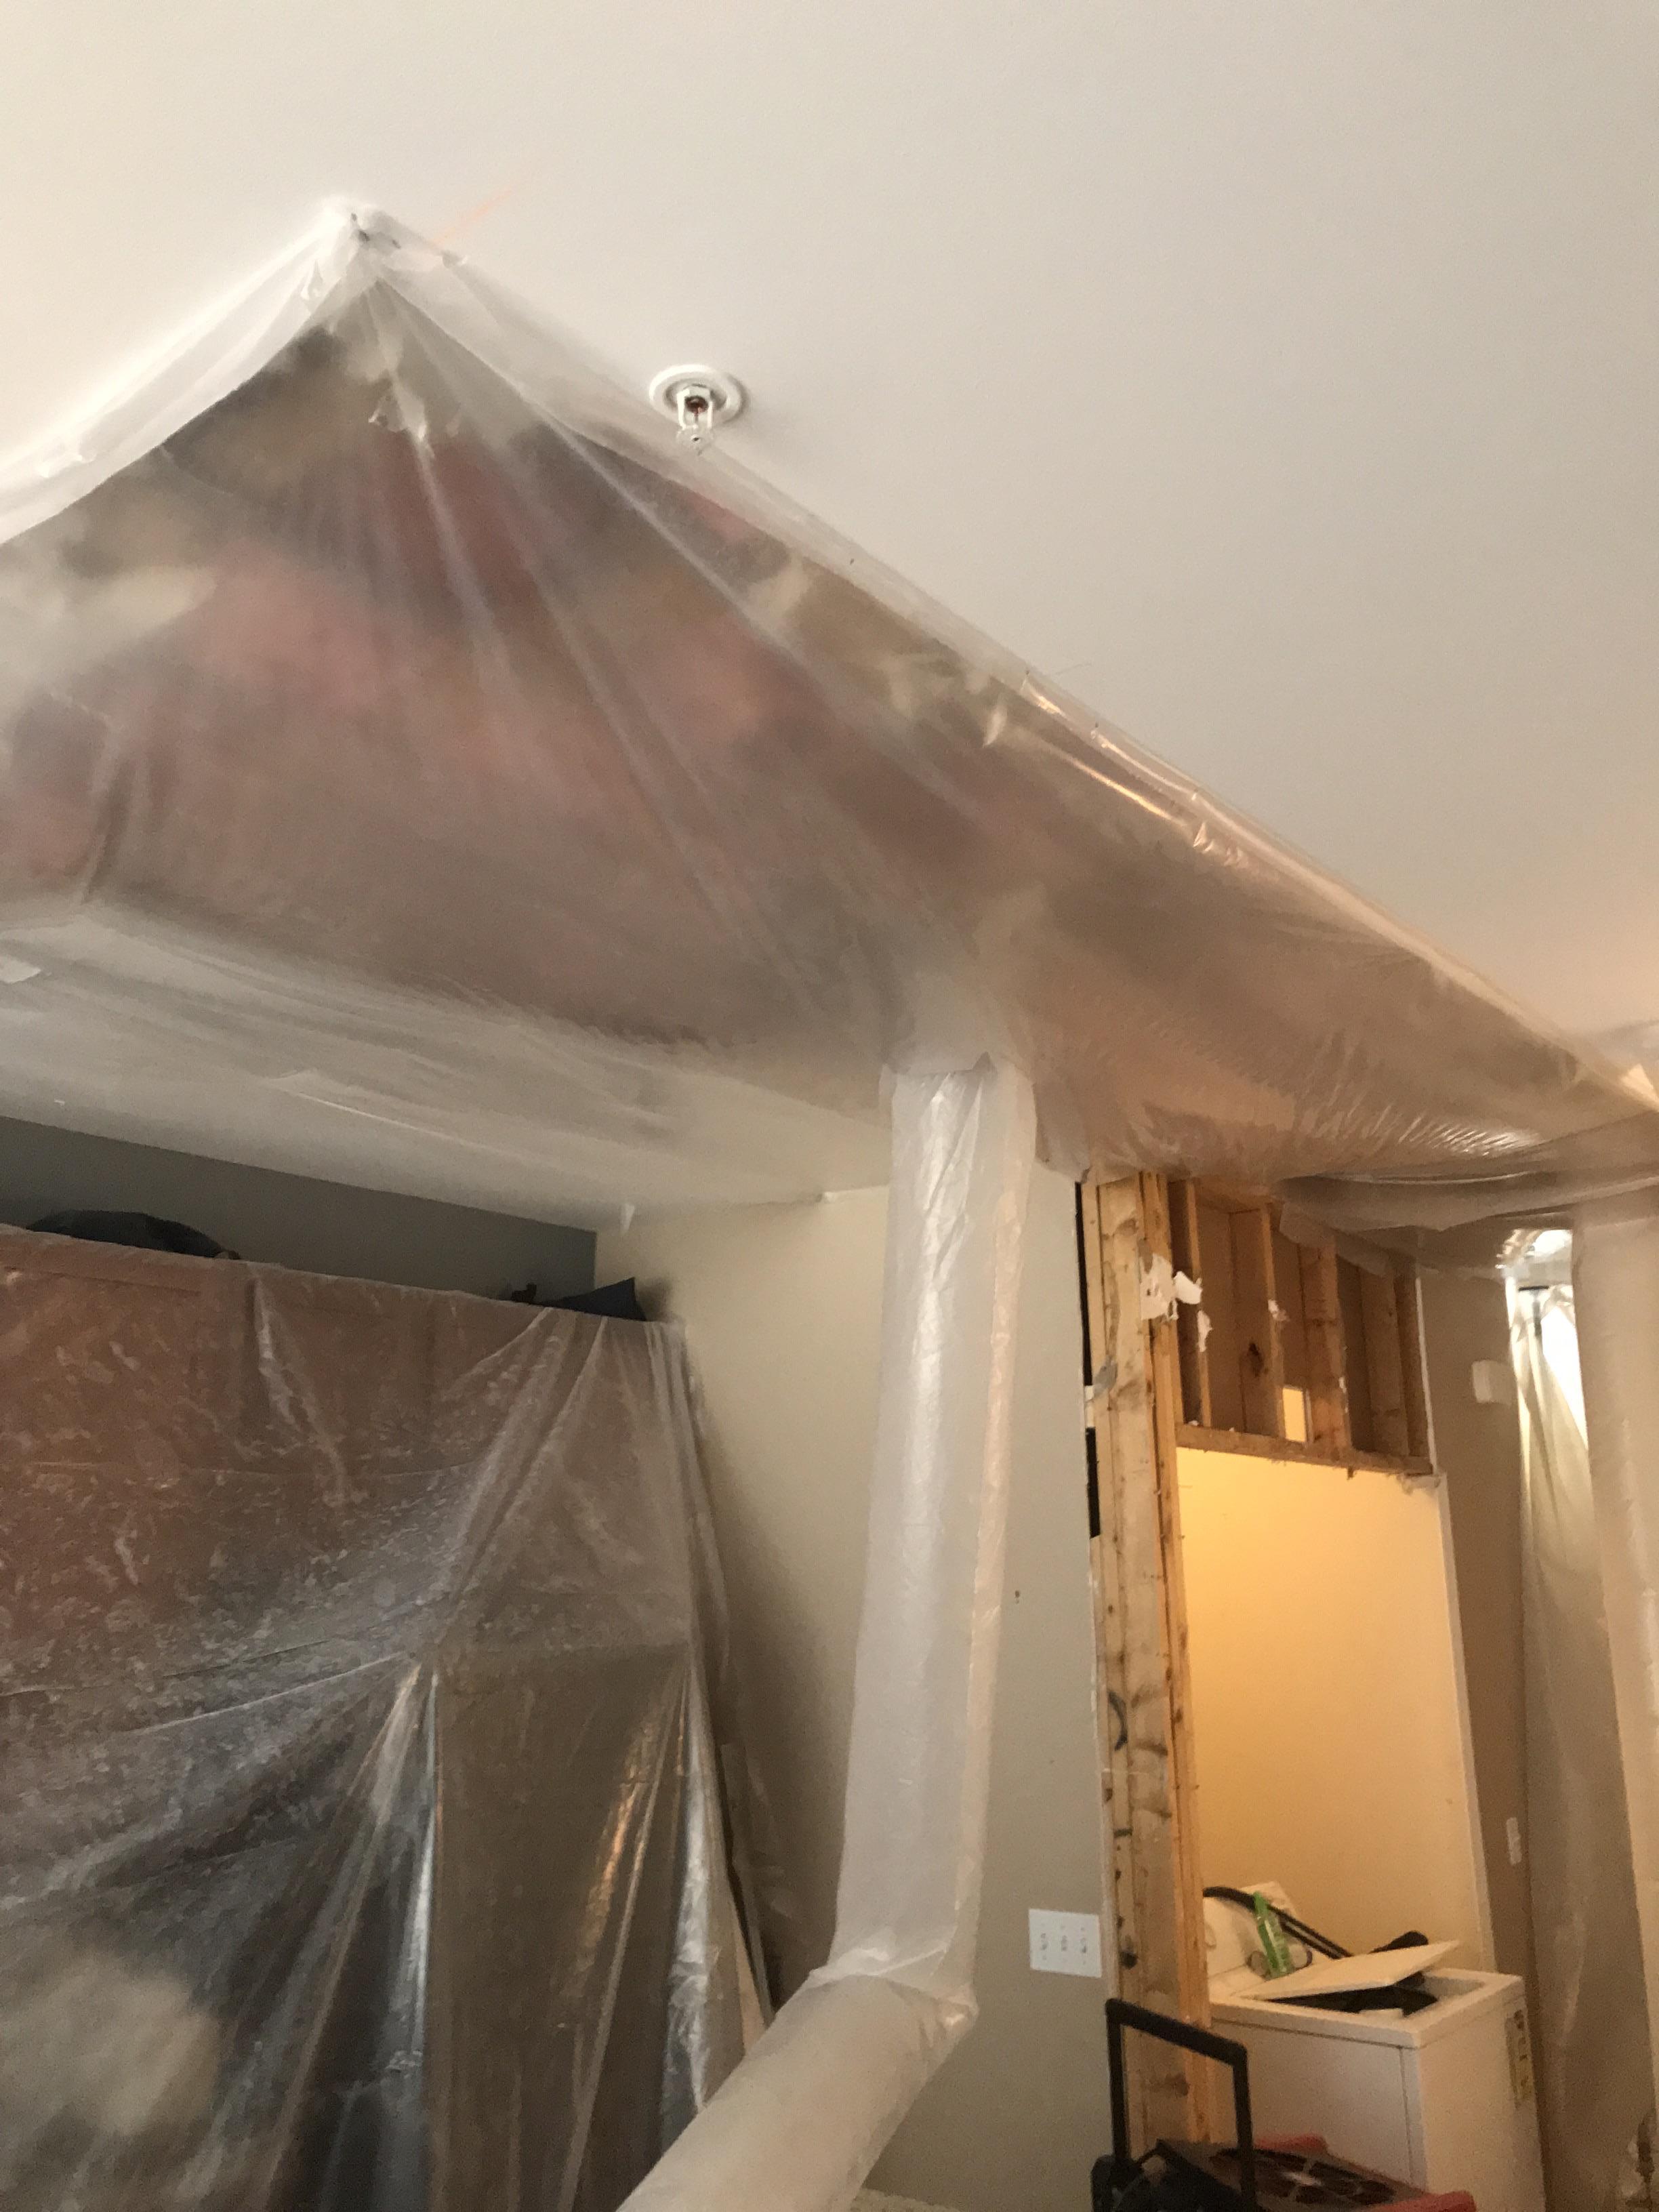 Containment and airflow to dry ceiling - lower unit